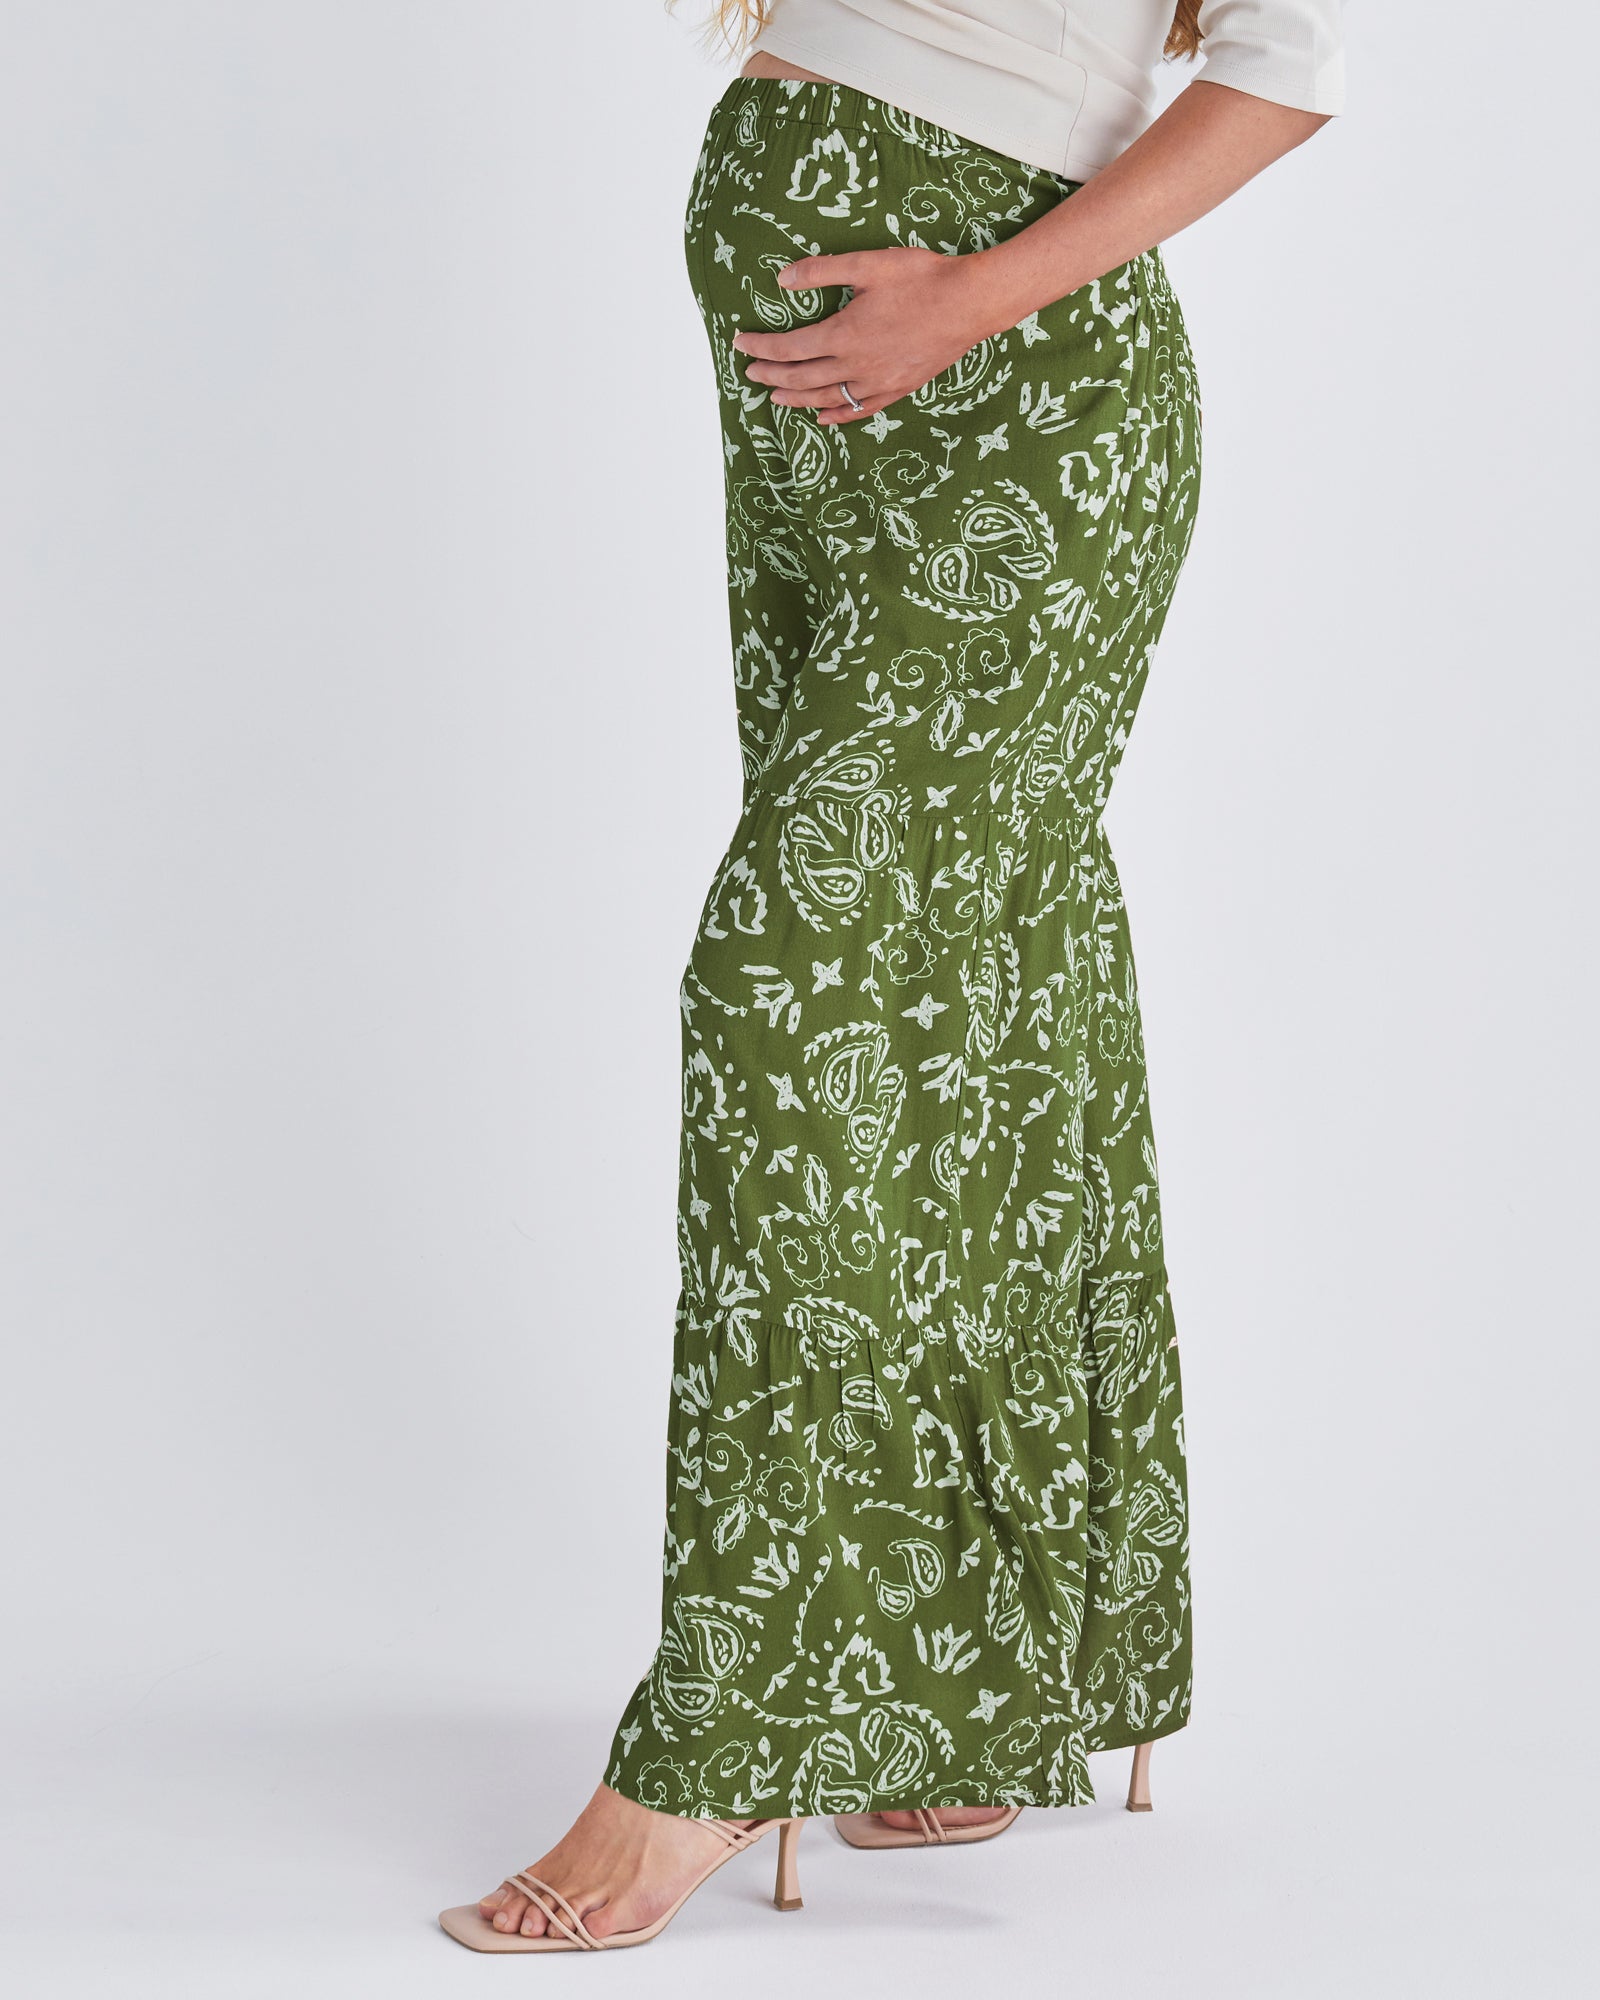 Side View - A pregnant Woman Wearing Stacie Wide Leg Khaki Maternity Pants in Paisley Print from Angel Maternity